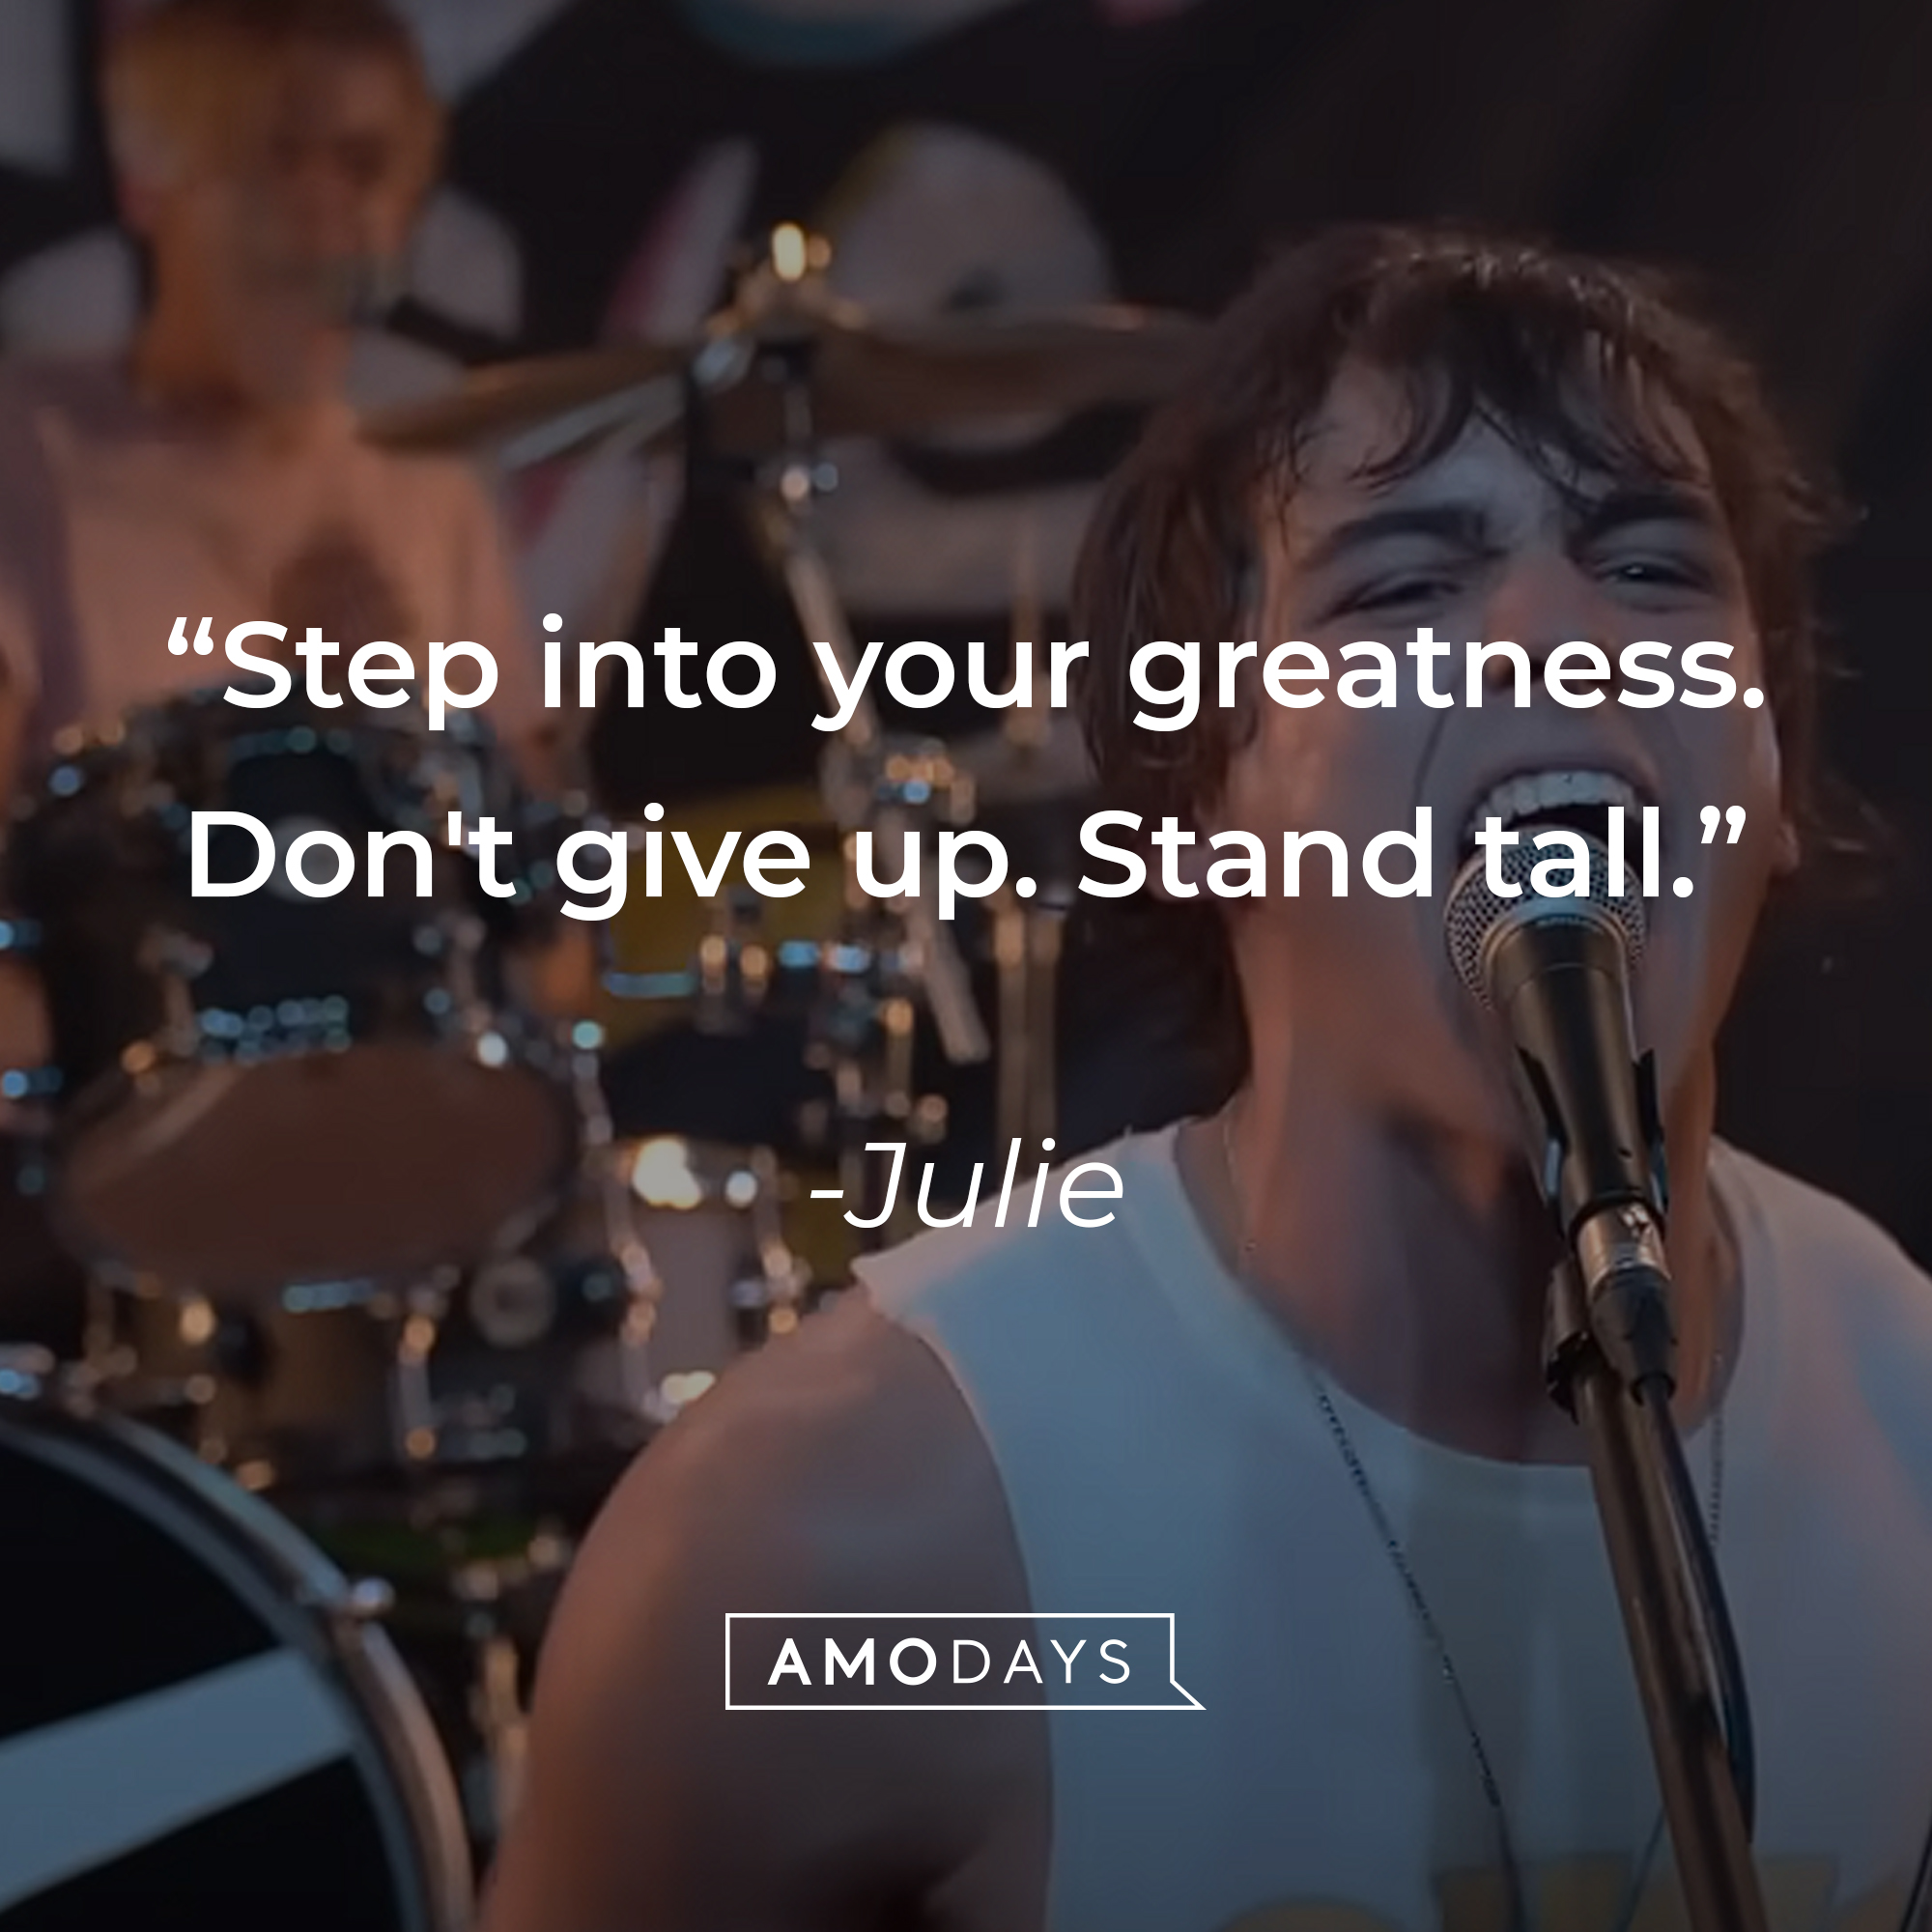 An image of Luke with Julia’s quote: "Step into your greatness. Don't give up. Stand tall." | Source: youtube.com/netflixafterschool